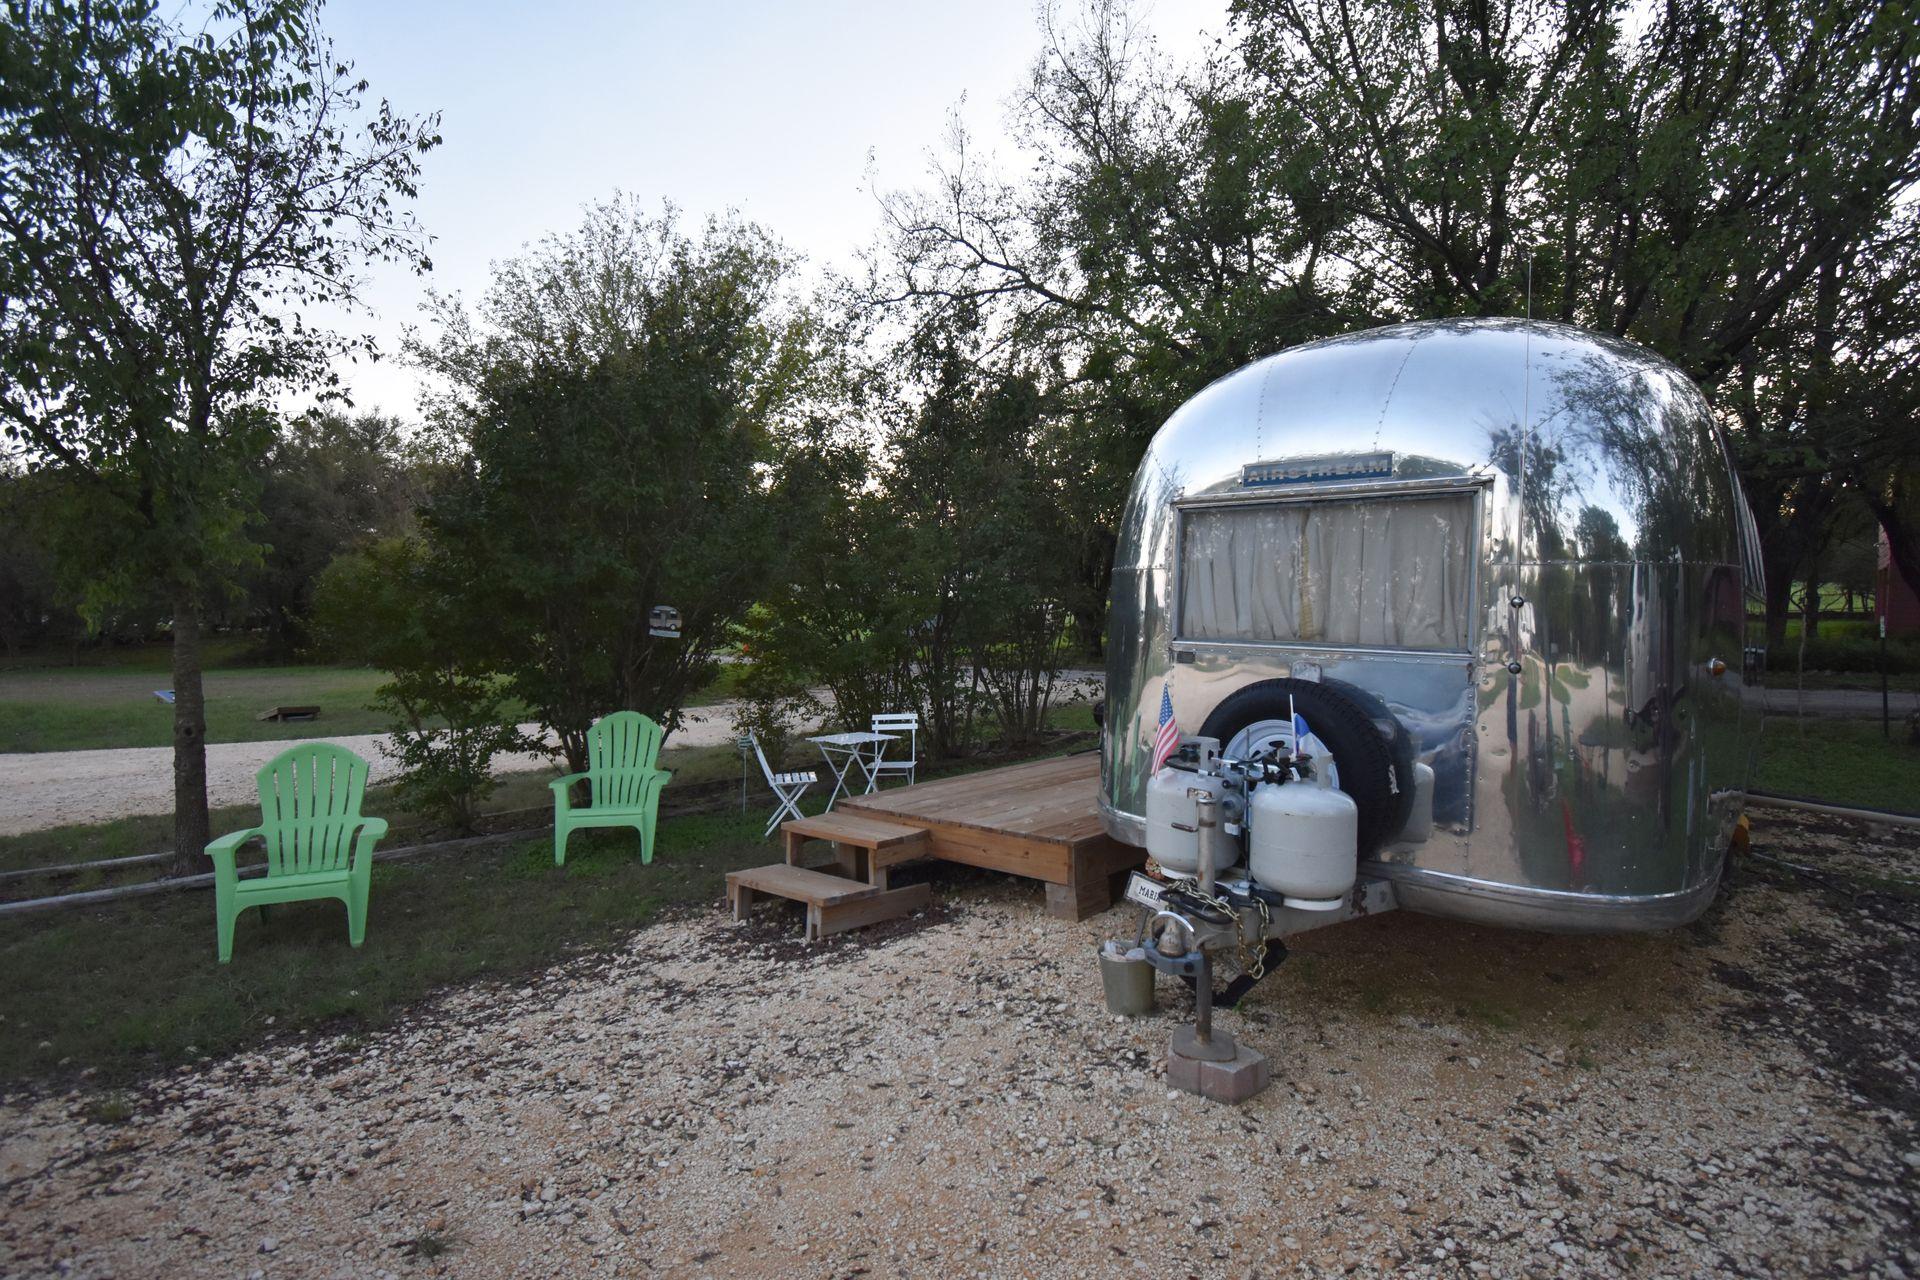 A silver airstream with some green chairs next to it.